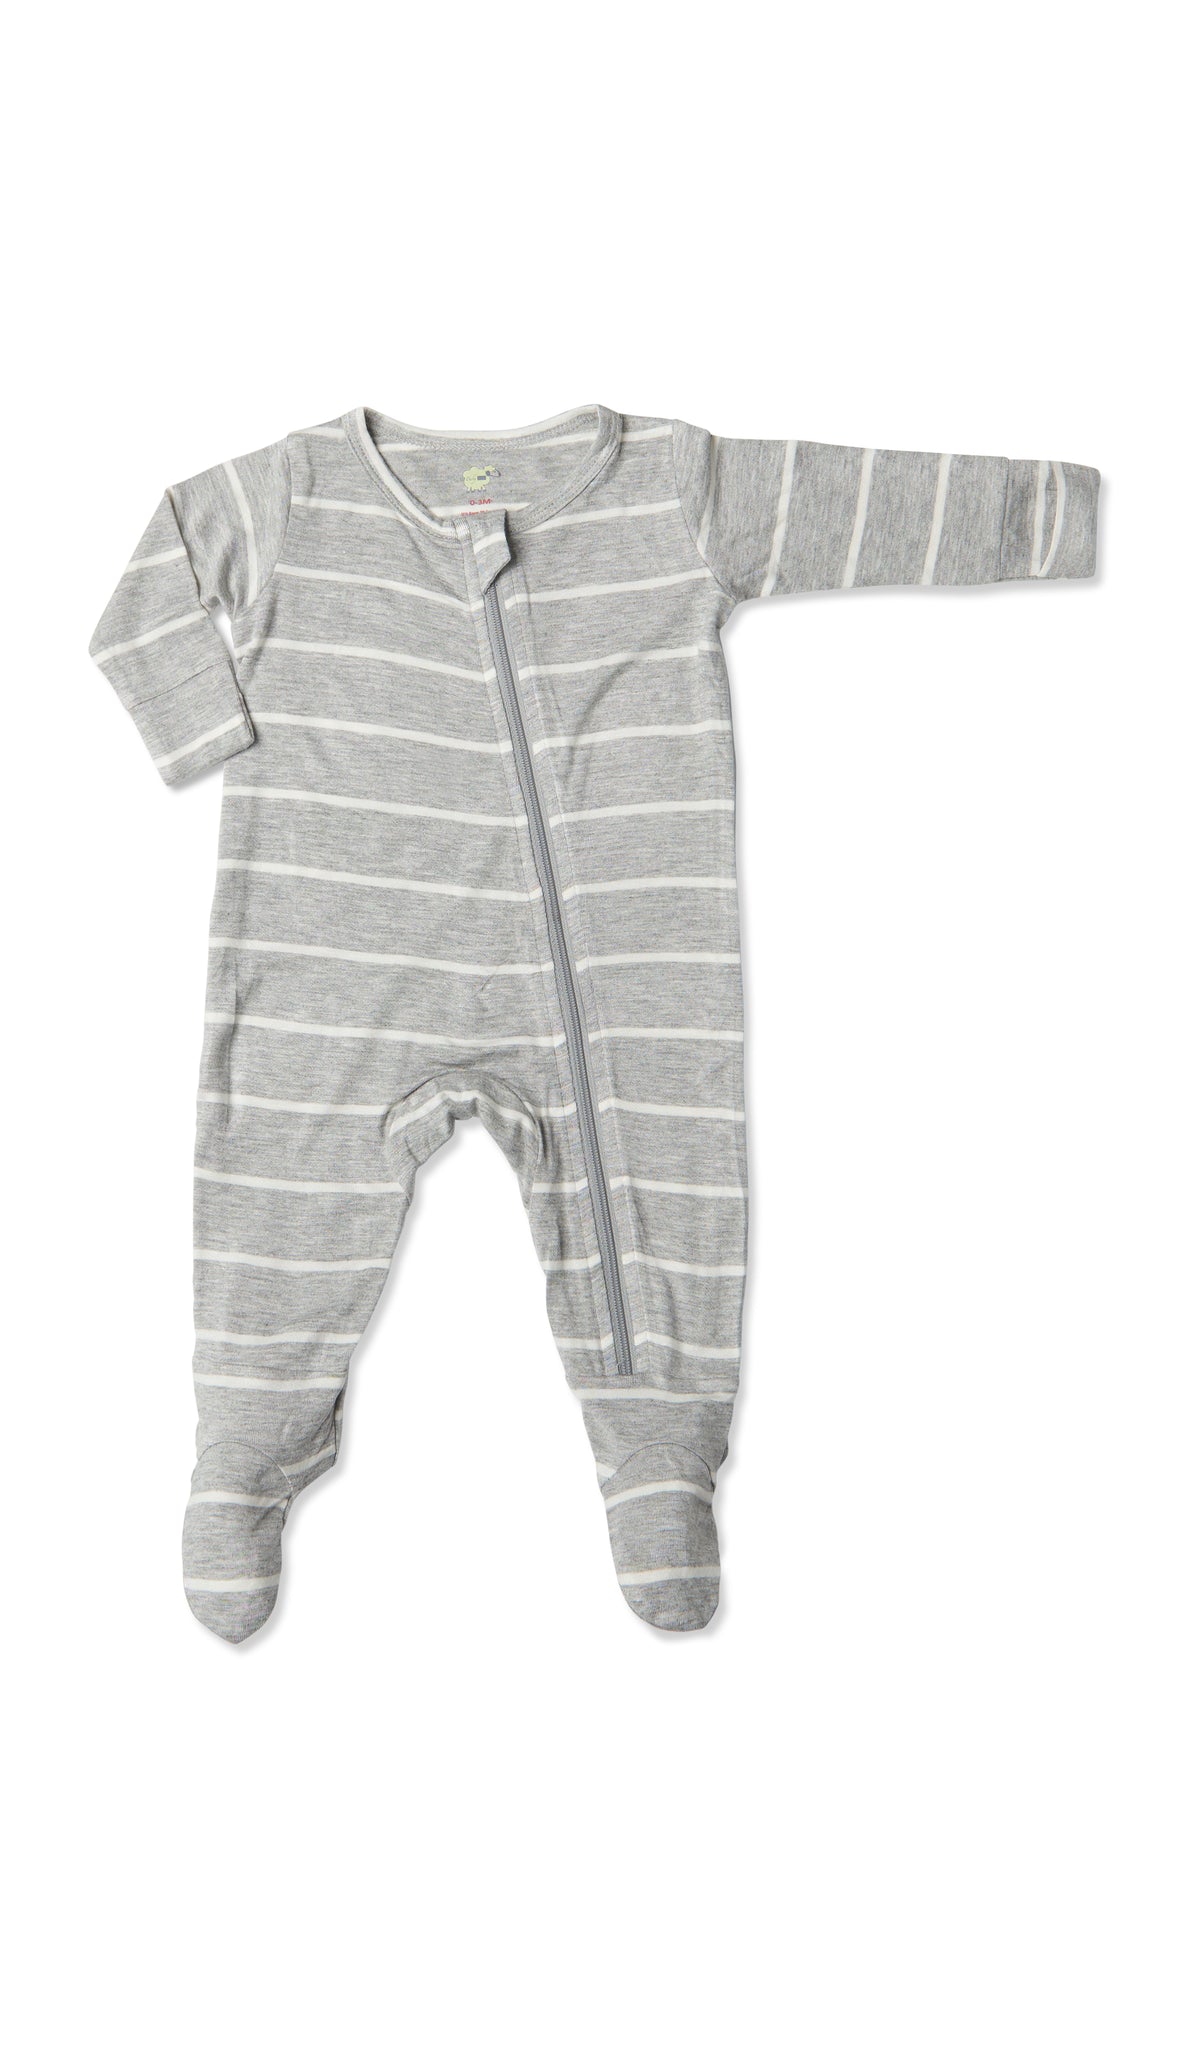 Heather Grey Footie with long sleeves and zip front.